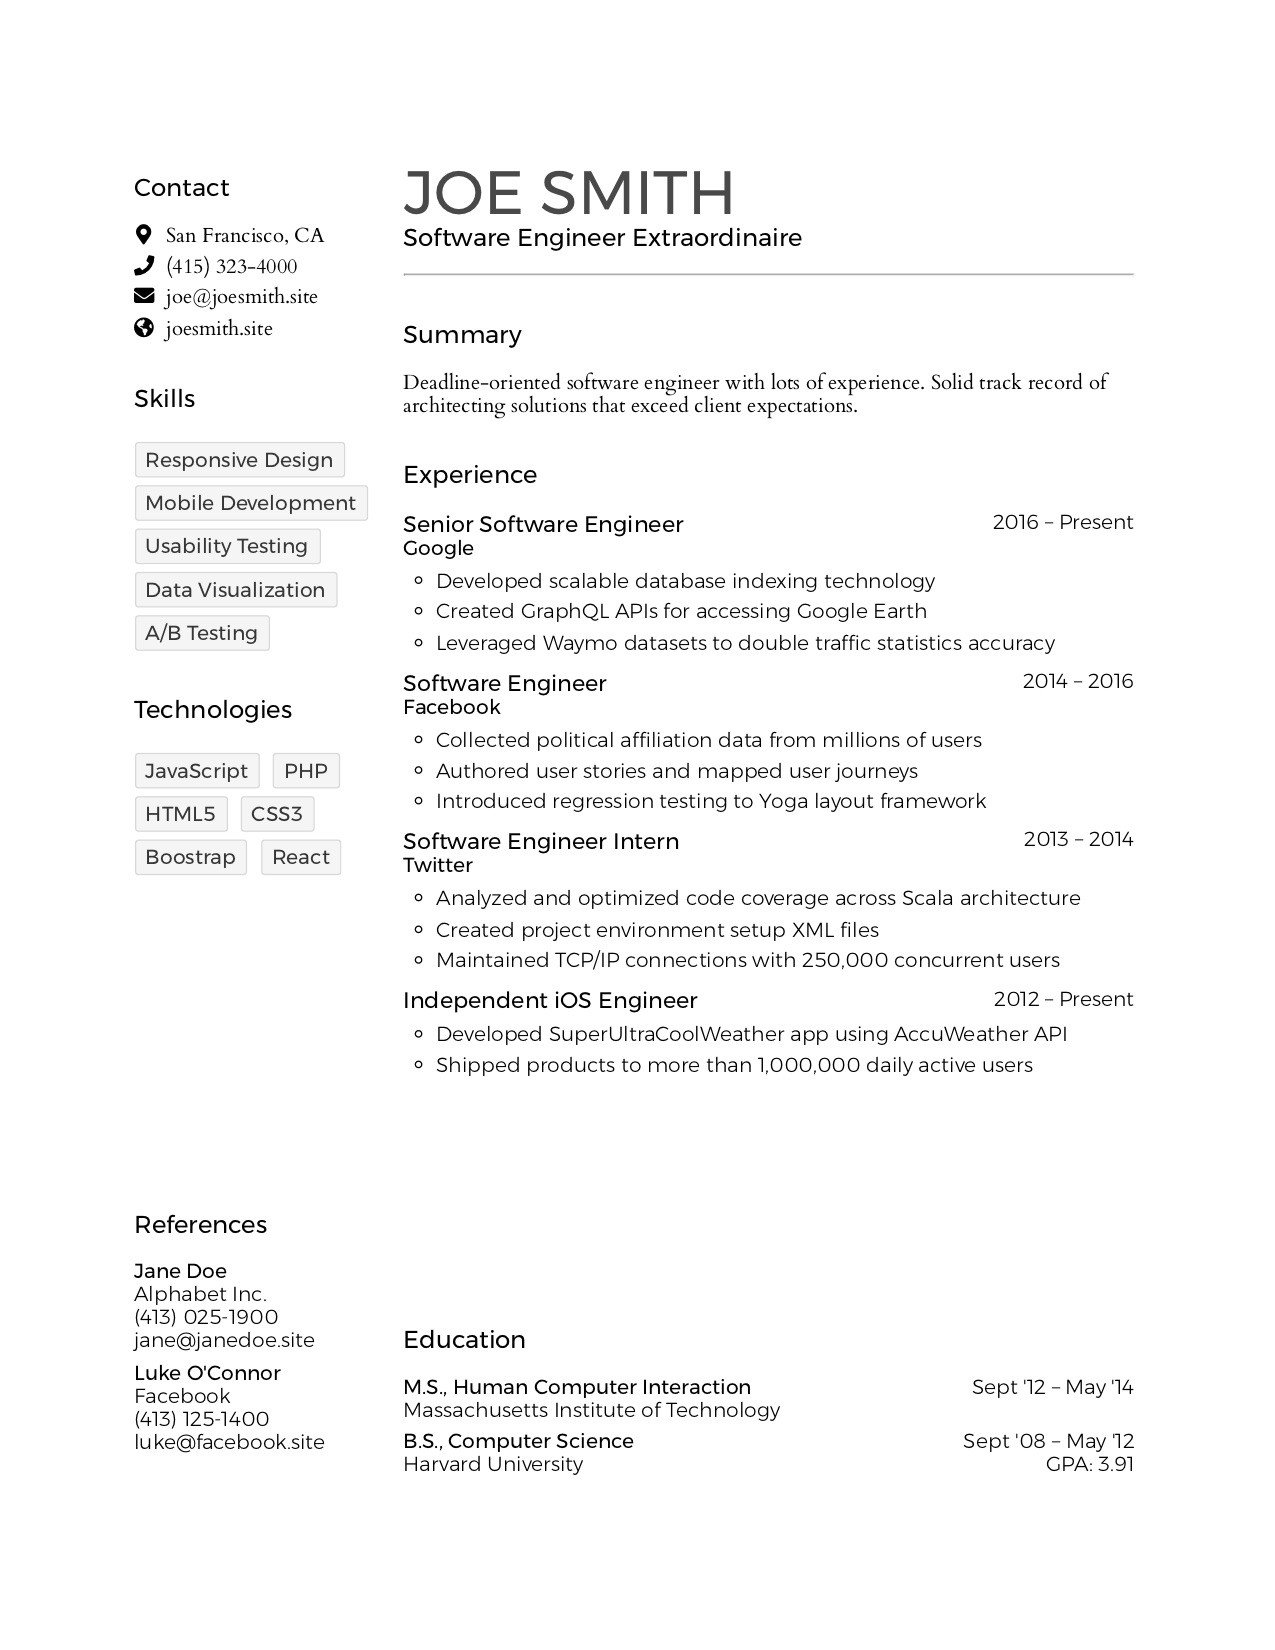 Resumes in HTML, CSS, and JS  Thomas Barrasso  Medium